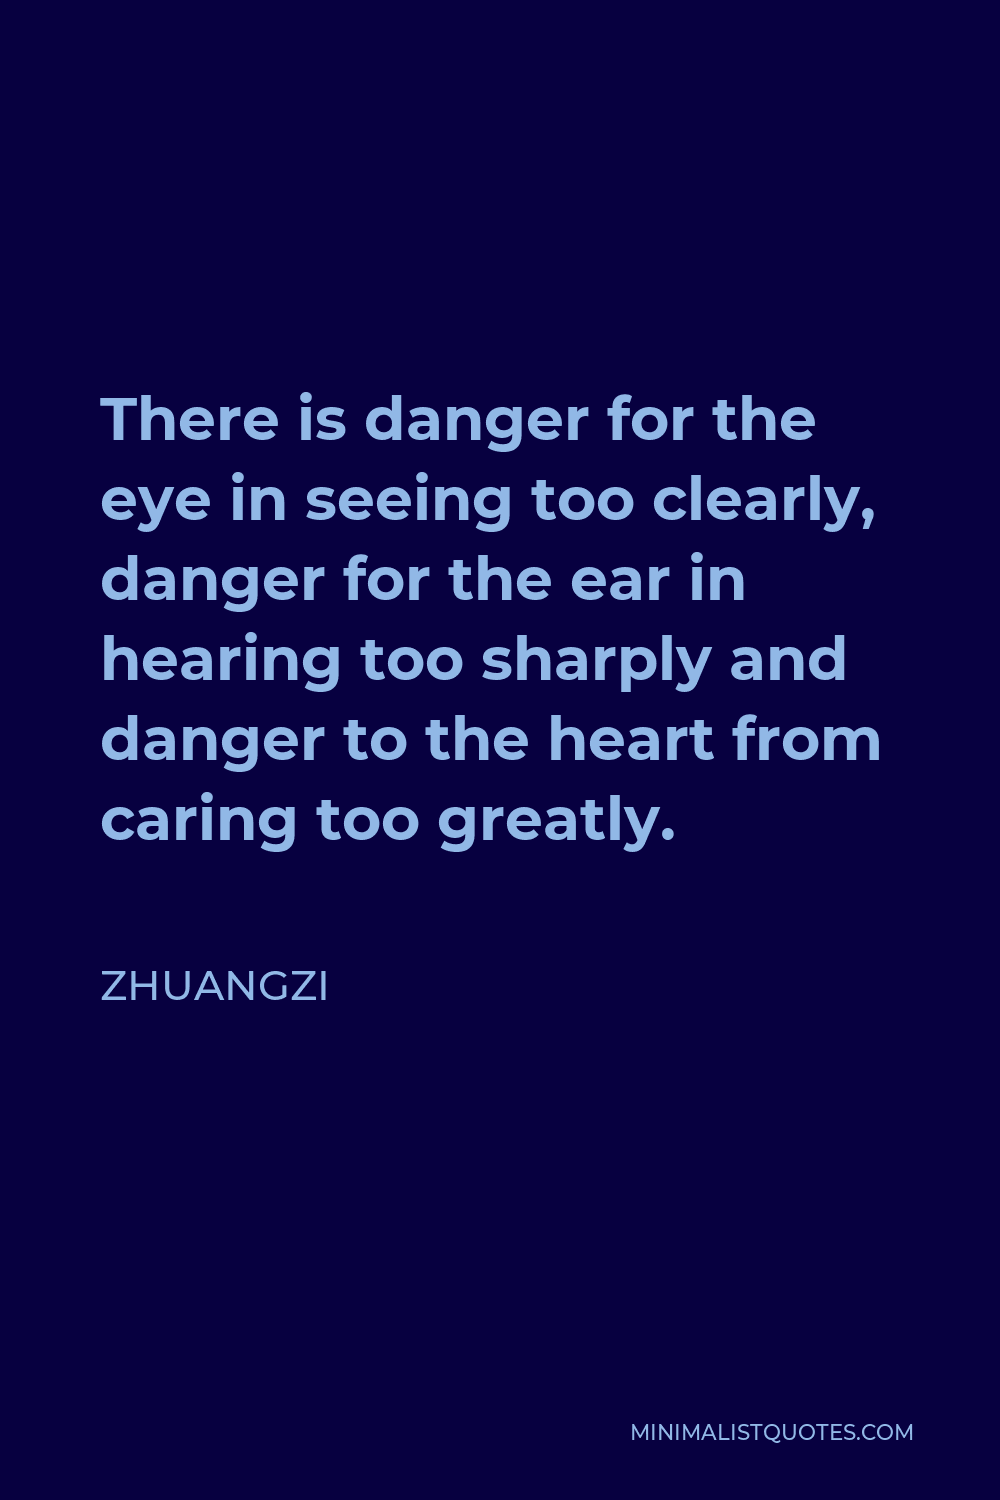 Zhuangzi Quote - There is danger for the eye in seeing too clearly, danger for the ear in hearing too sharply and danger to the heart from caring too greatly.